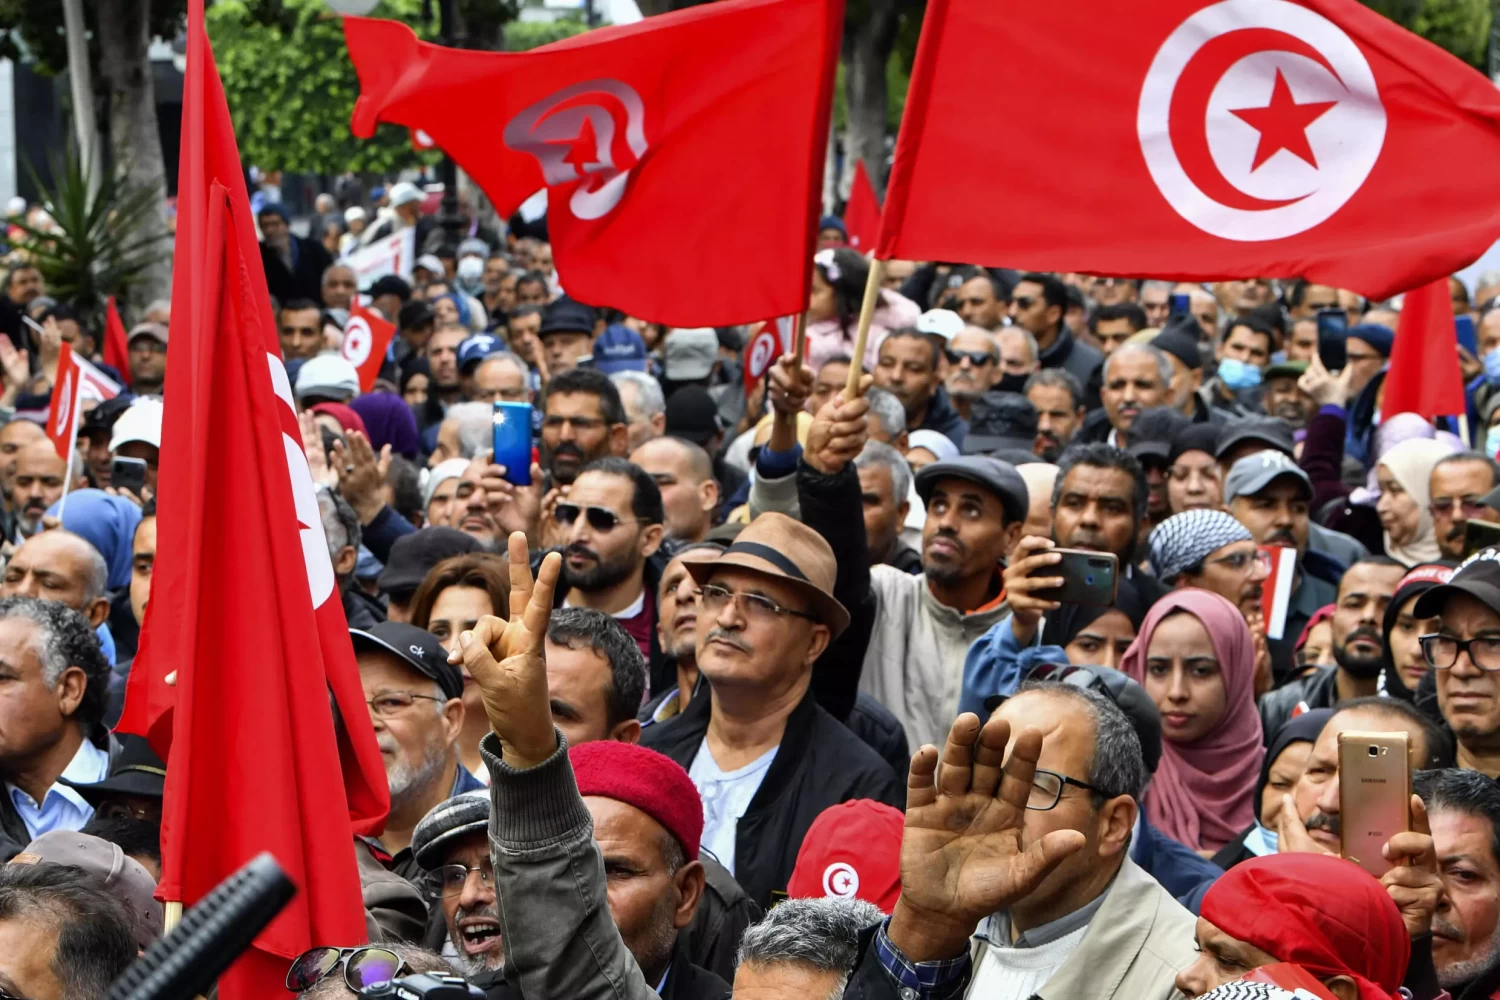 Tunisian demonstrators take part in a rally against President Kais Saied called for by the opposition National Salvation Front coalition in Tunis, December 10, 2022. Tunisian demonstrators take part in a rally against President Kais Saied called for by the opposition National Salvation Front coalition in Tunis, December 10, 2022. © Fethi Belaid, AFP